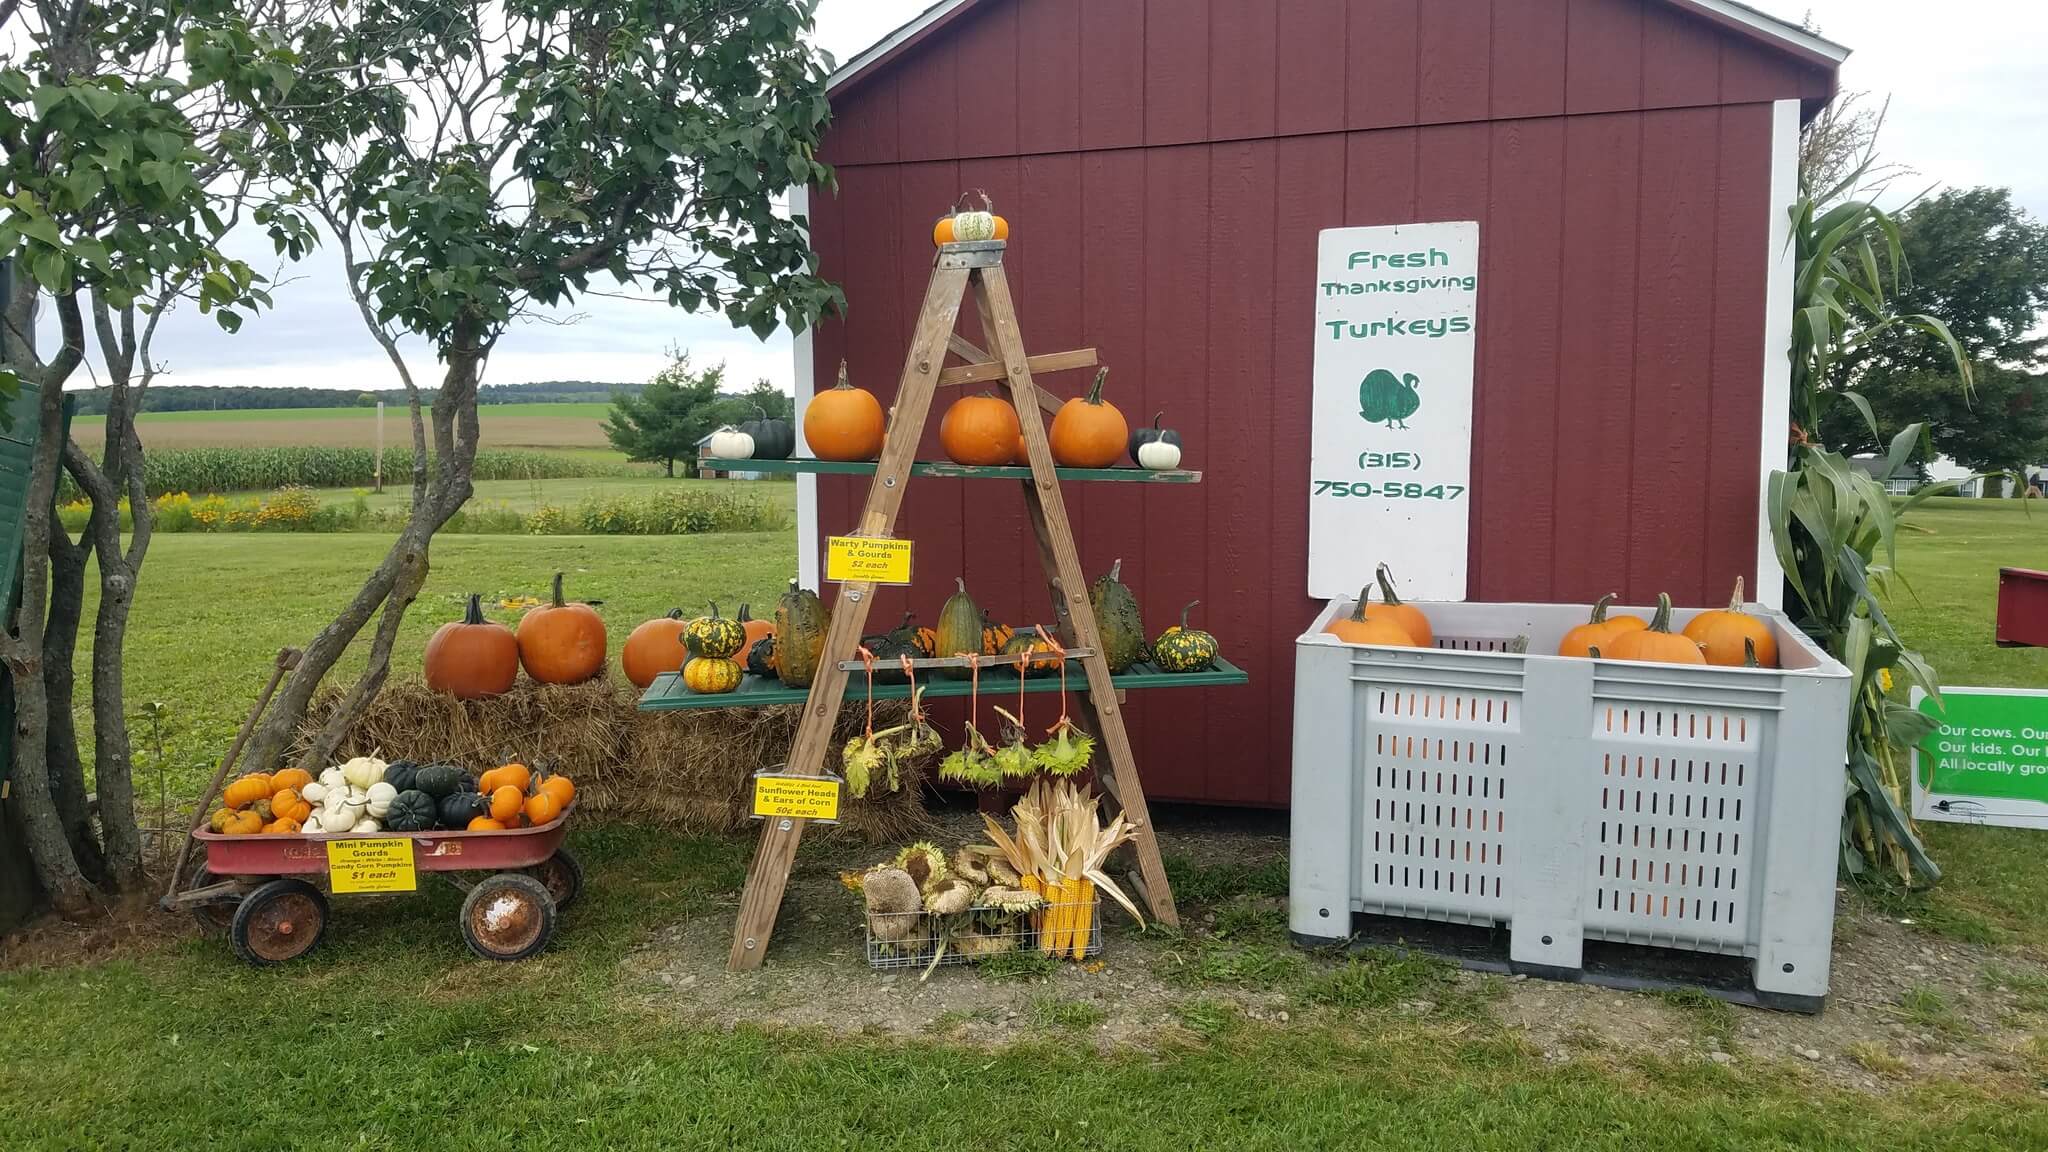 Display outside of farm stand in the fall